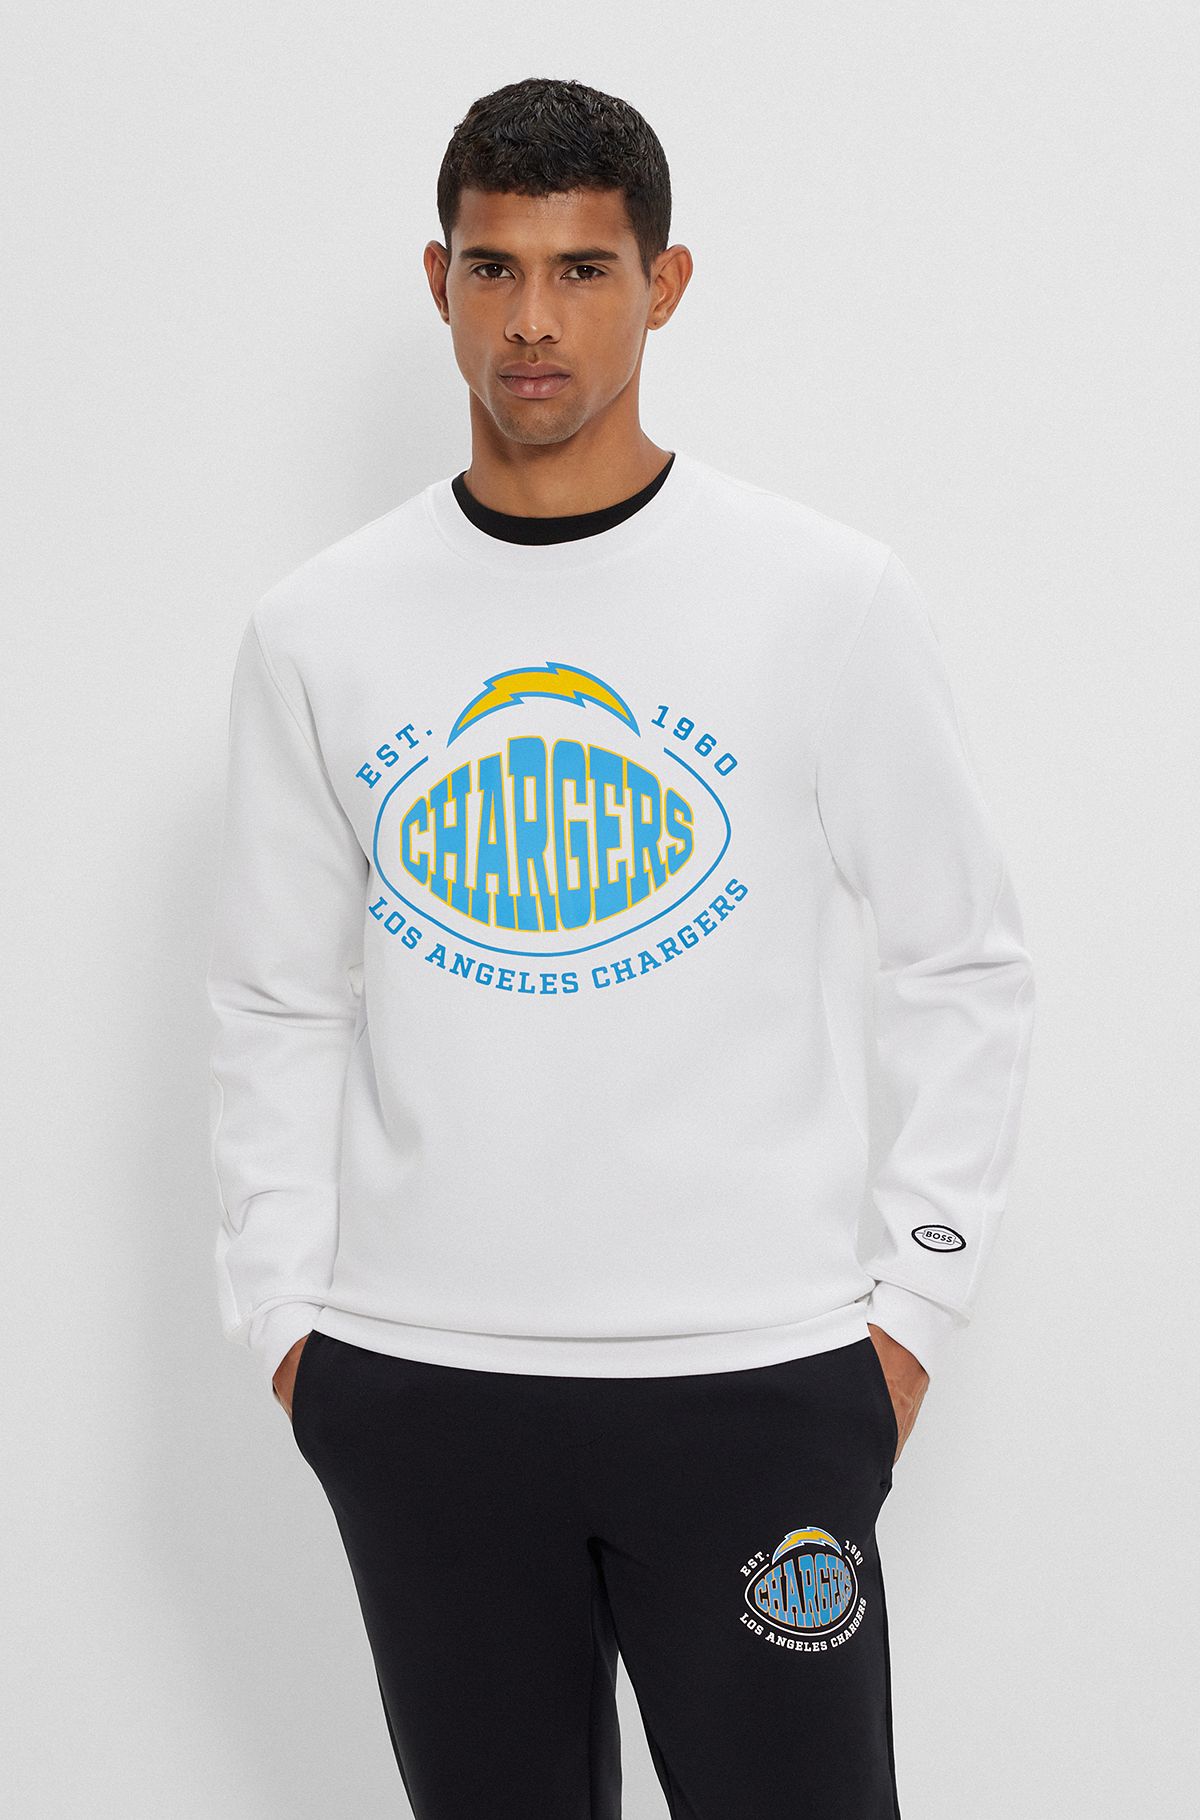 BOSS x NFL cotton-blend sweatshirt with collaborative branding, Chargers